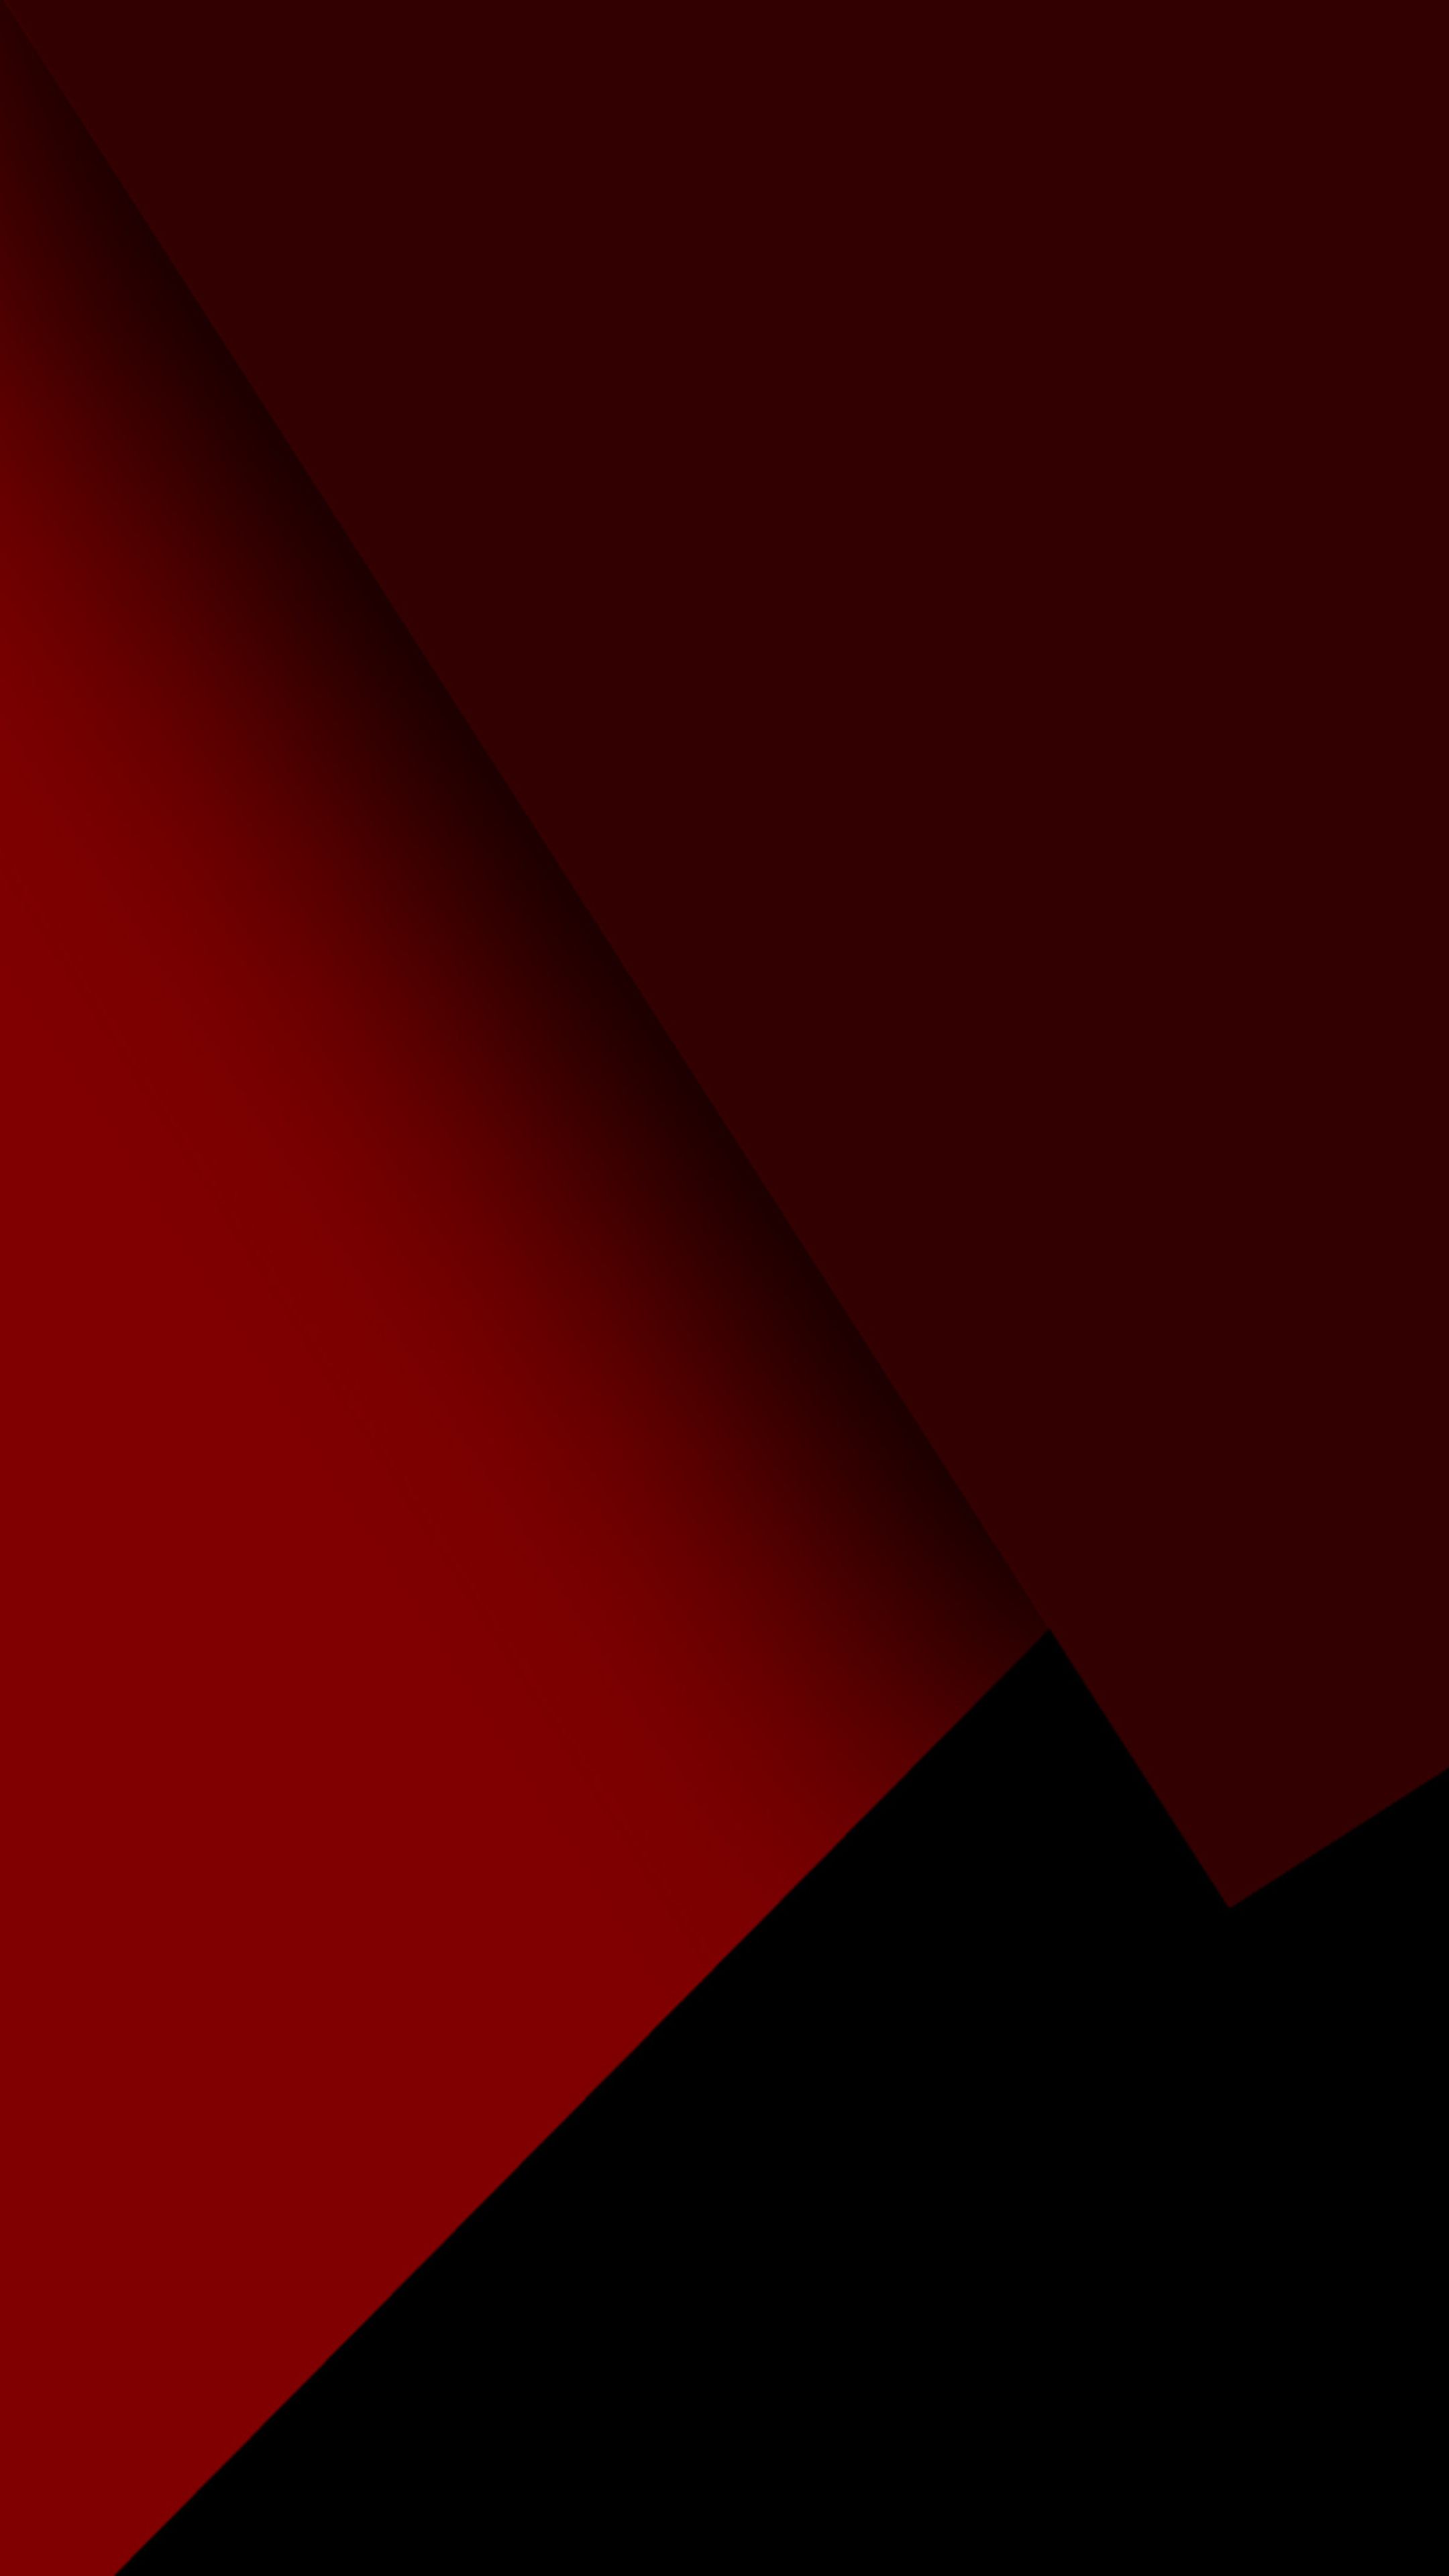 Dark Red Black Abstract 4k Sony Xperia X, XZ, Z5 Premium HD 4k Wallpaper, Image, Background, Photo and Picture